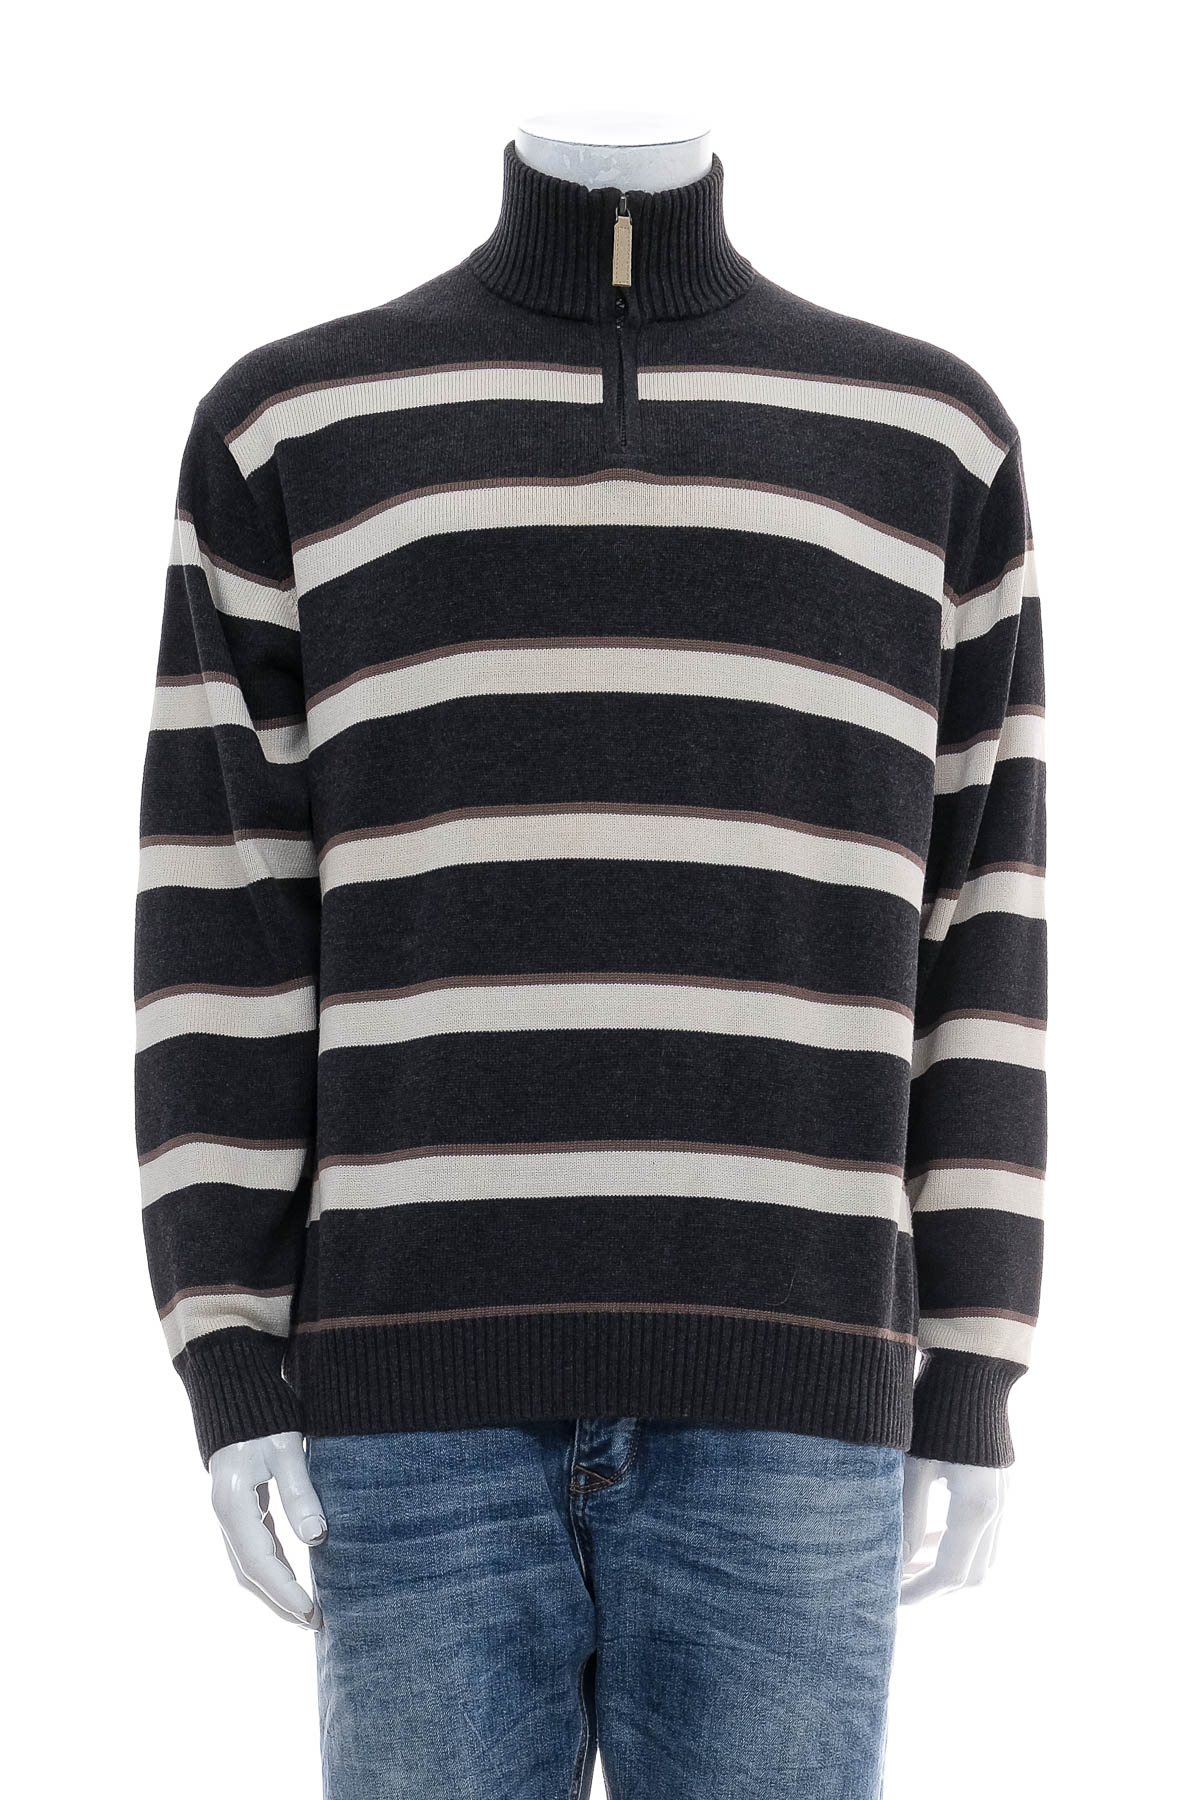 Men's sweater - Peter Fitch - 0